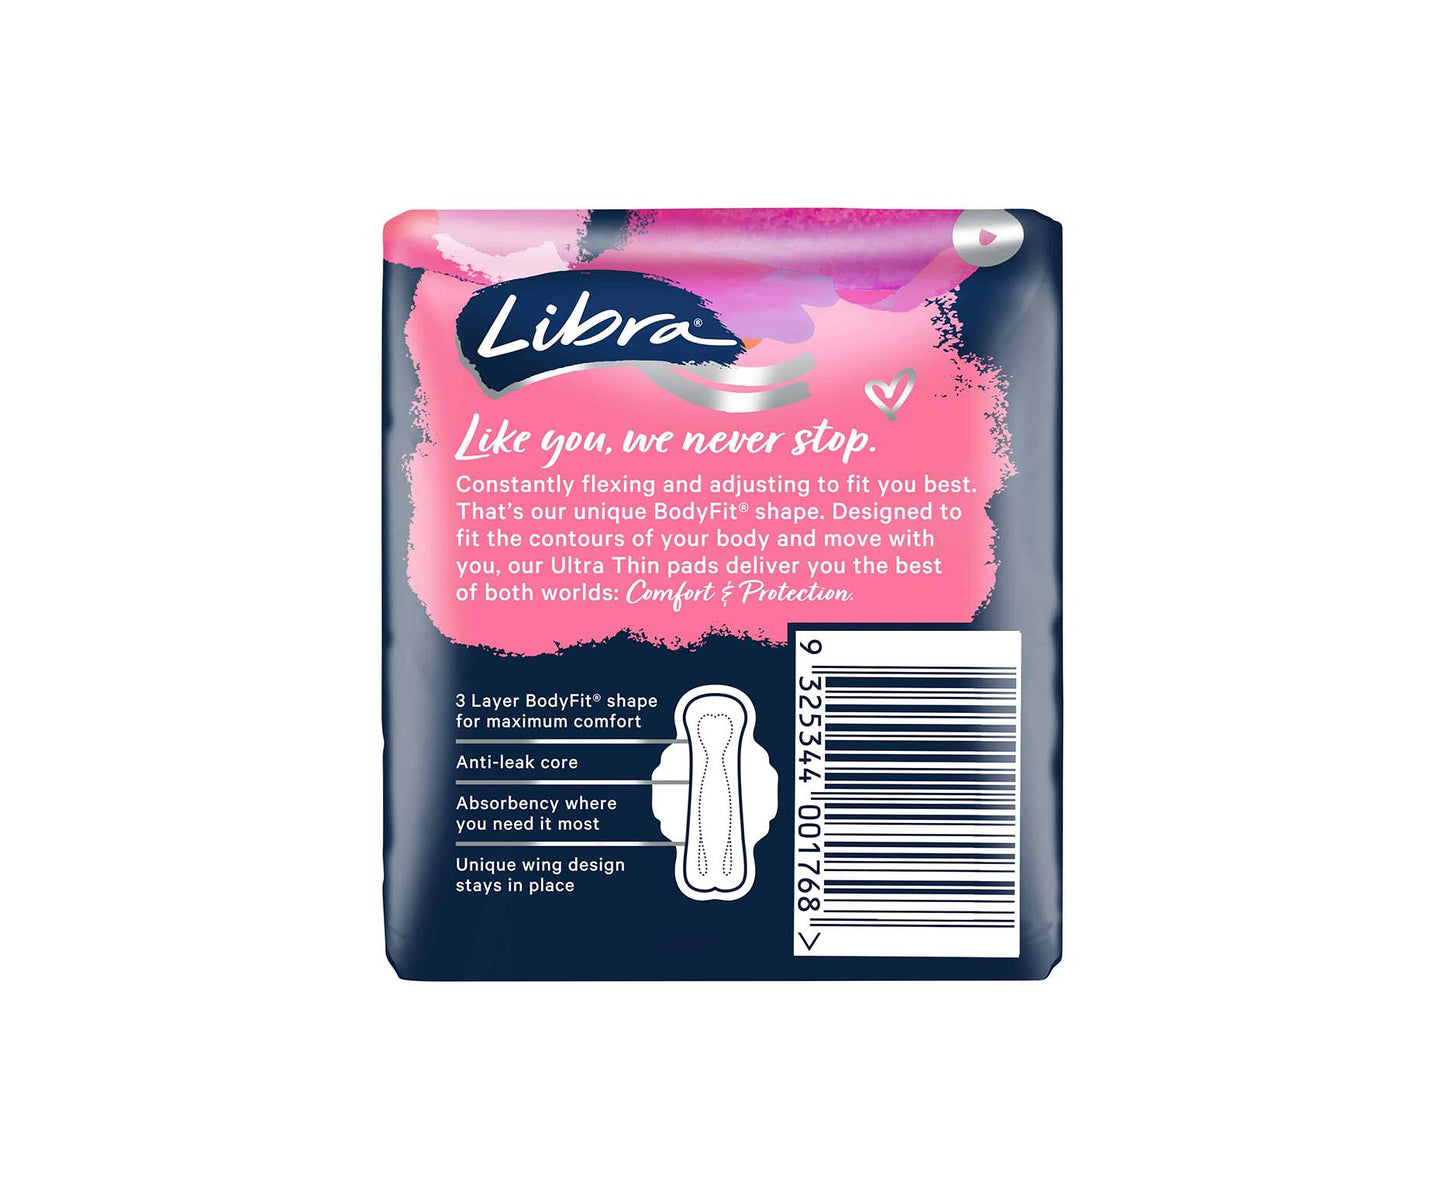 Libra Ultra Thin Pads Super With Wings 12